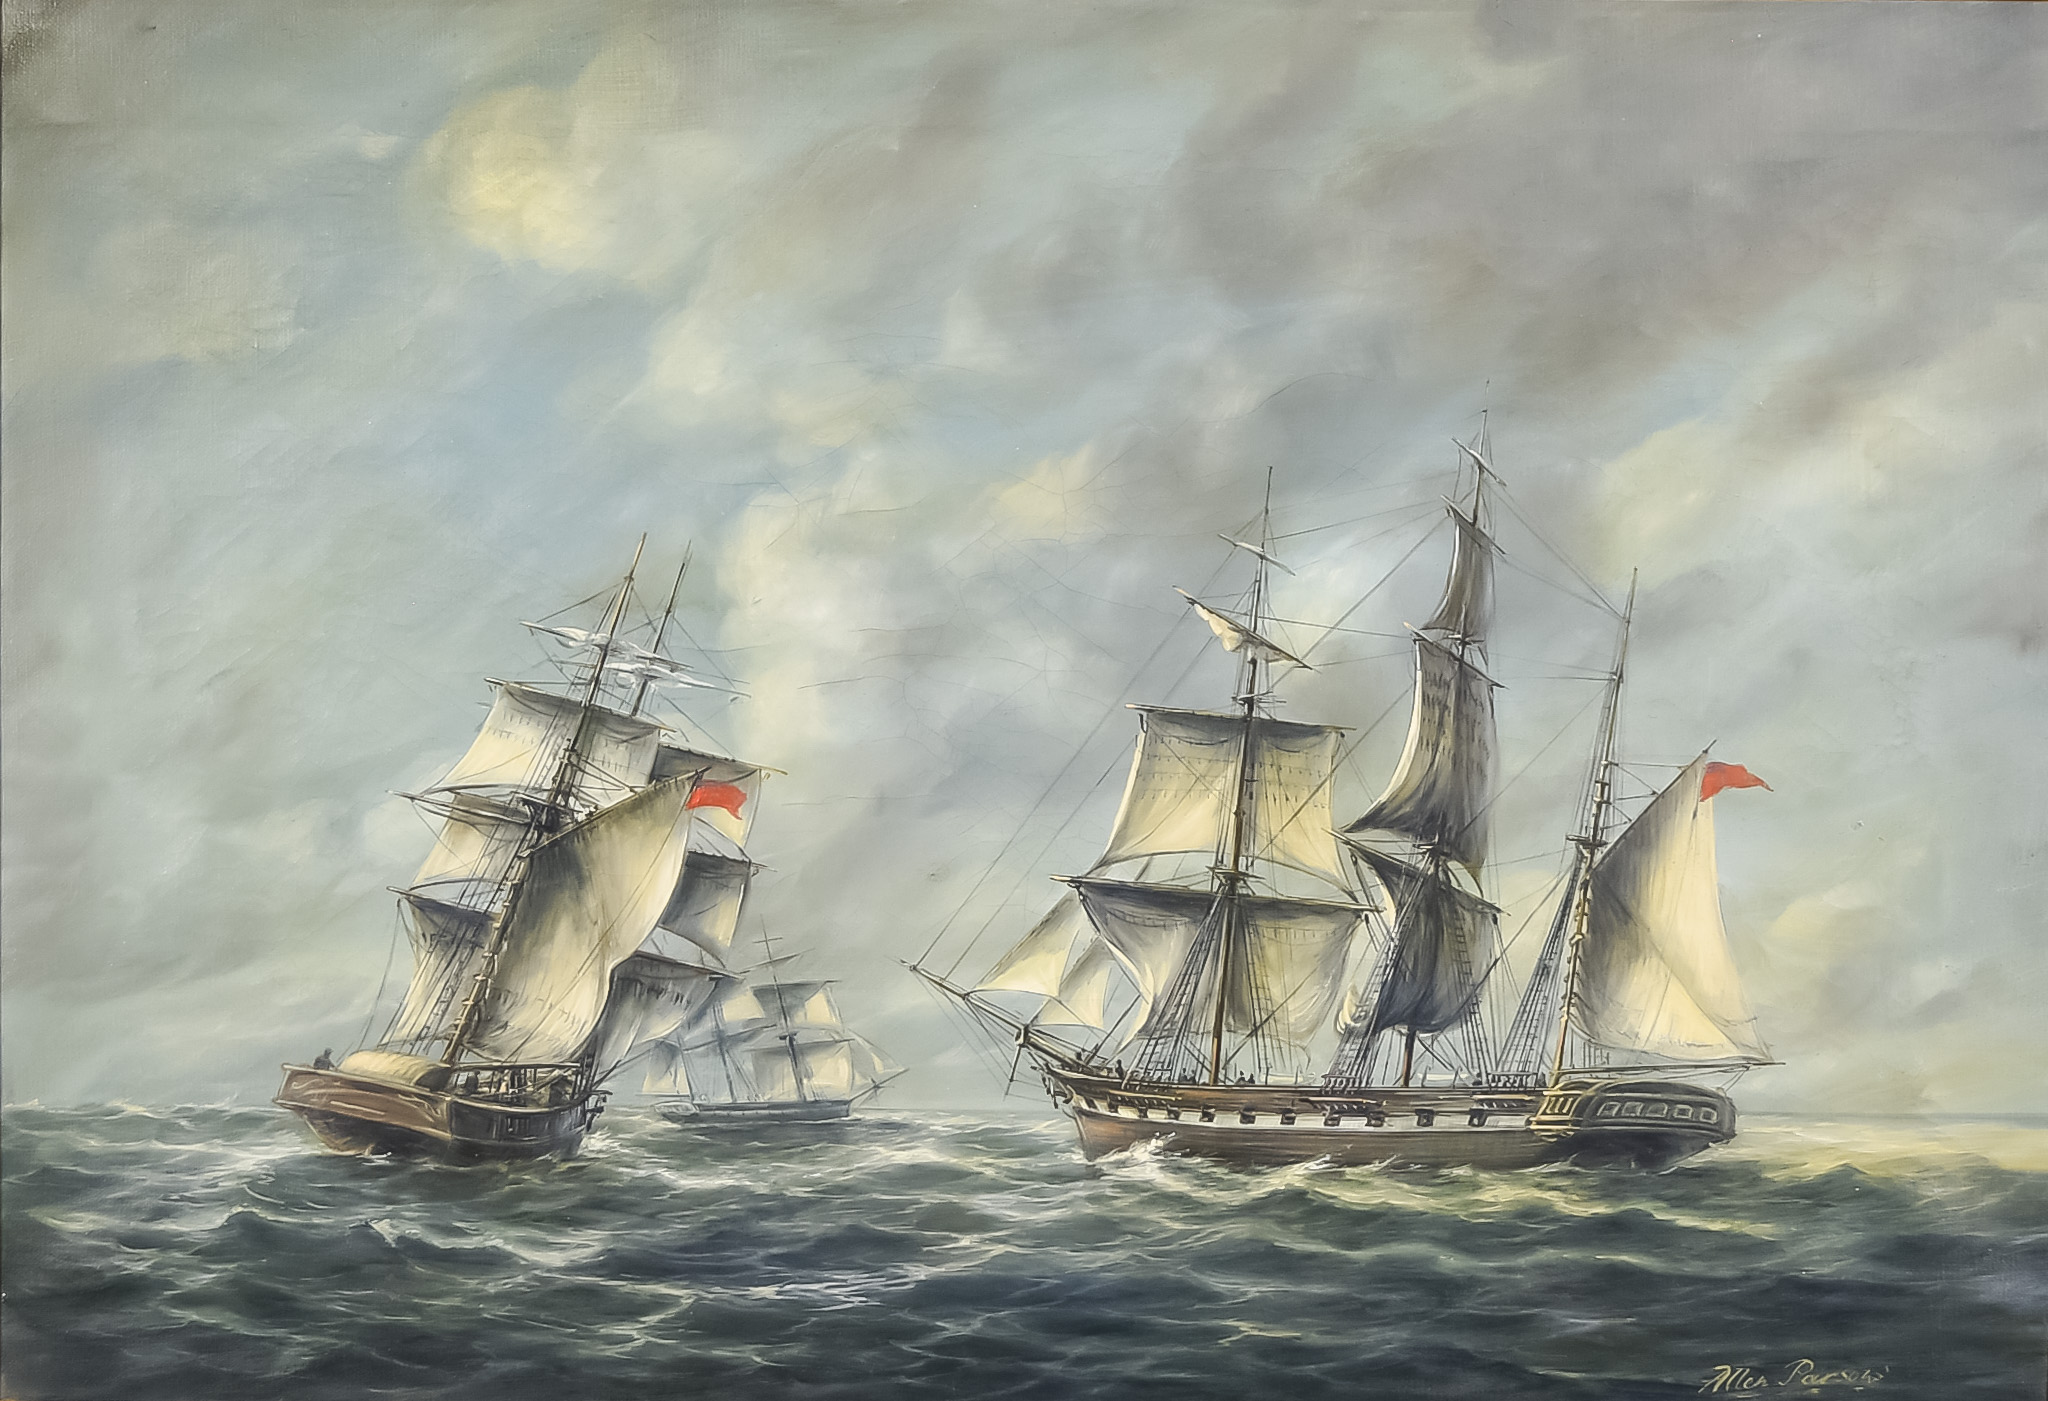 Allan Parsons - Oil painting - Marine scene with an English 22-gun ship and two other ships in